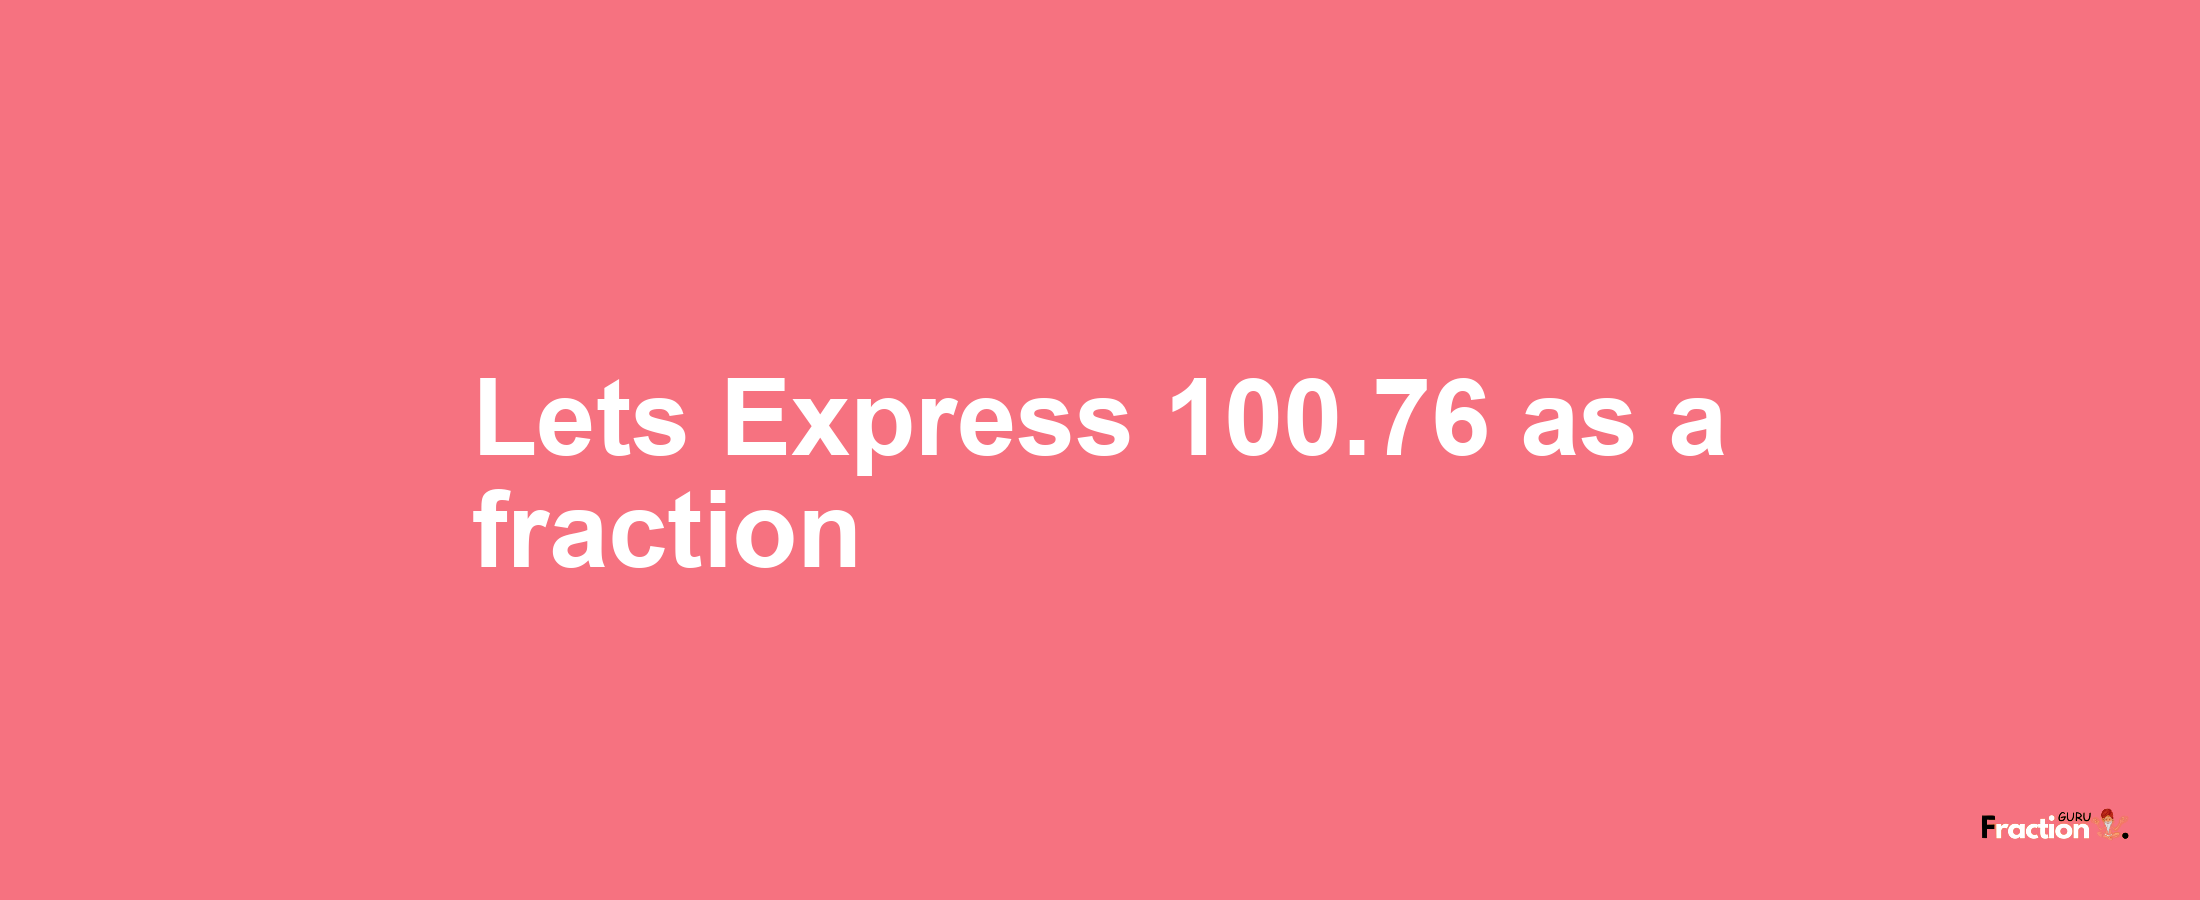 Lets Express 100.76 as afraction